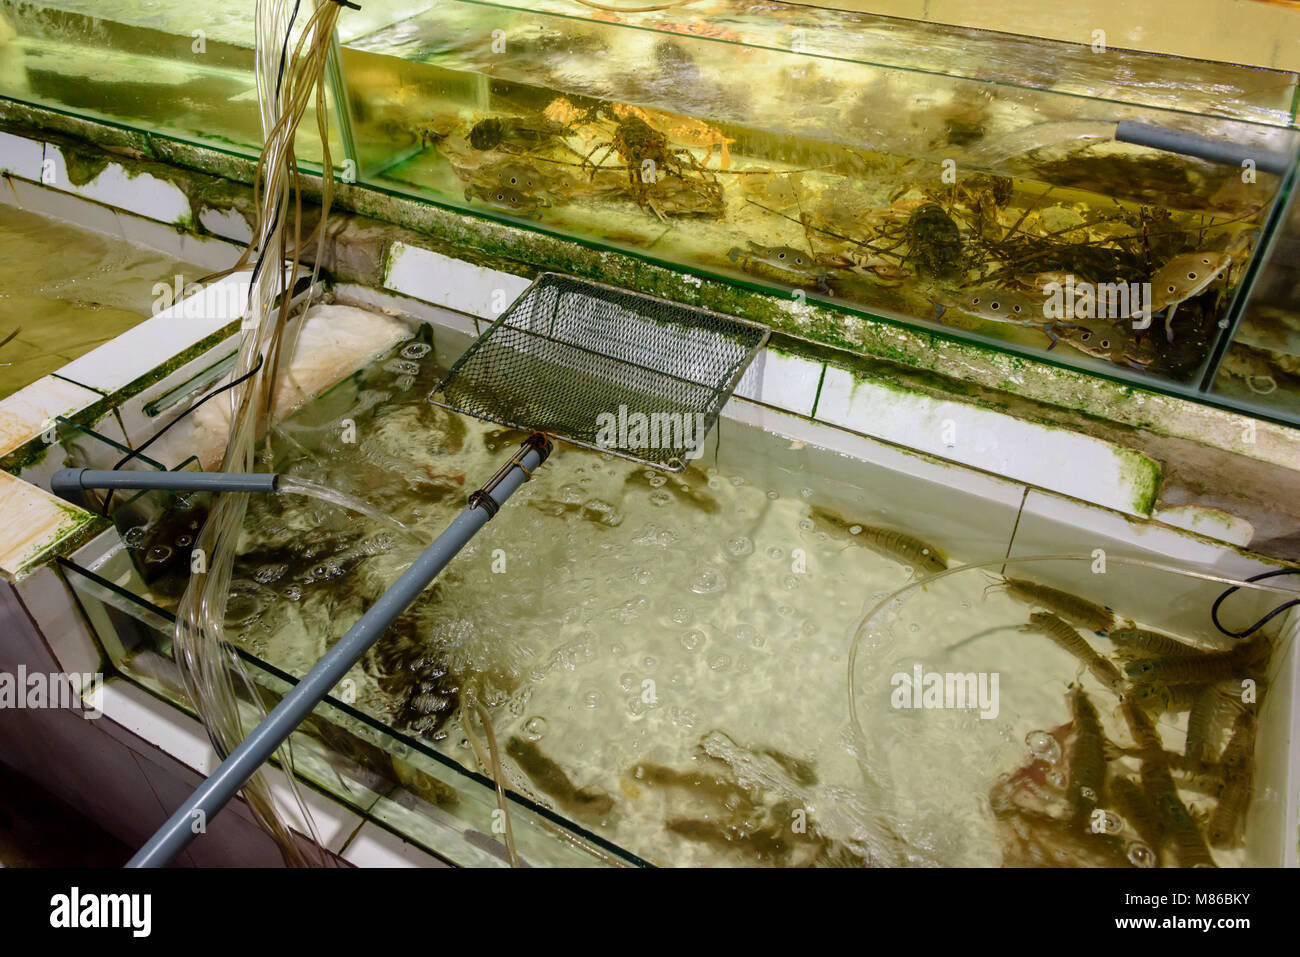 Fish and lobsters in tanks at a seafood restaurant in Hoi An, Vietnam Stock Photo